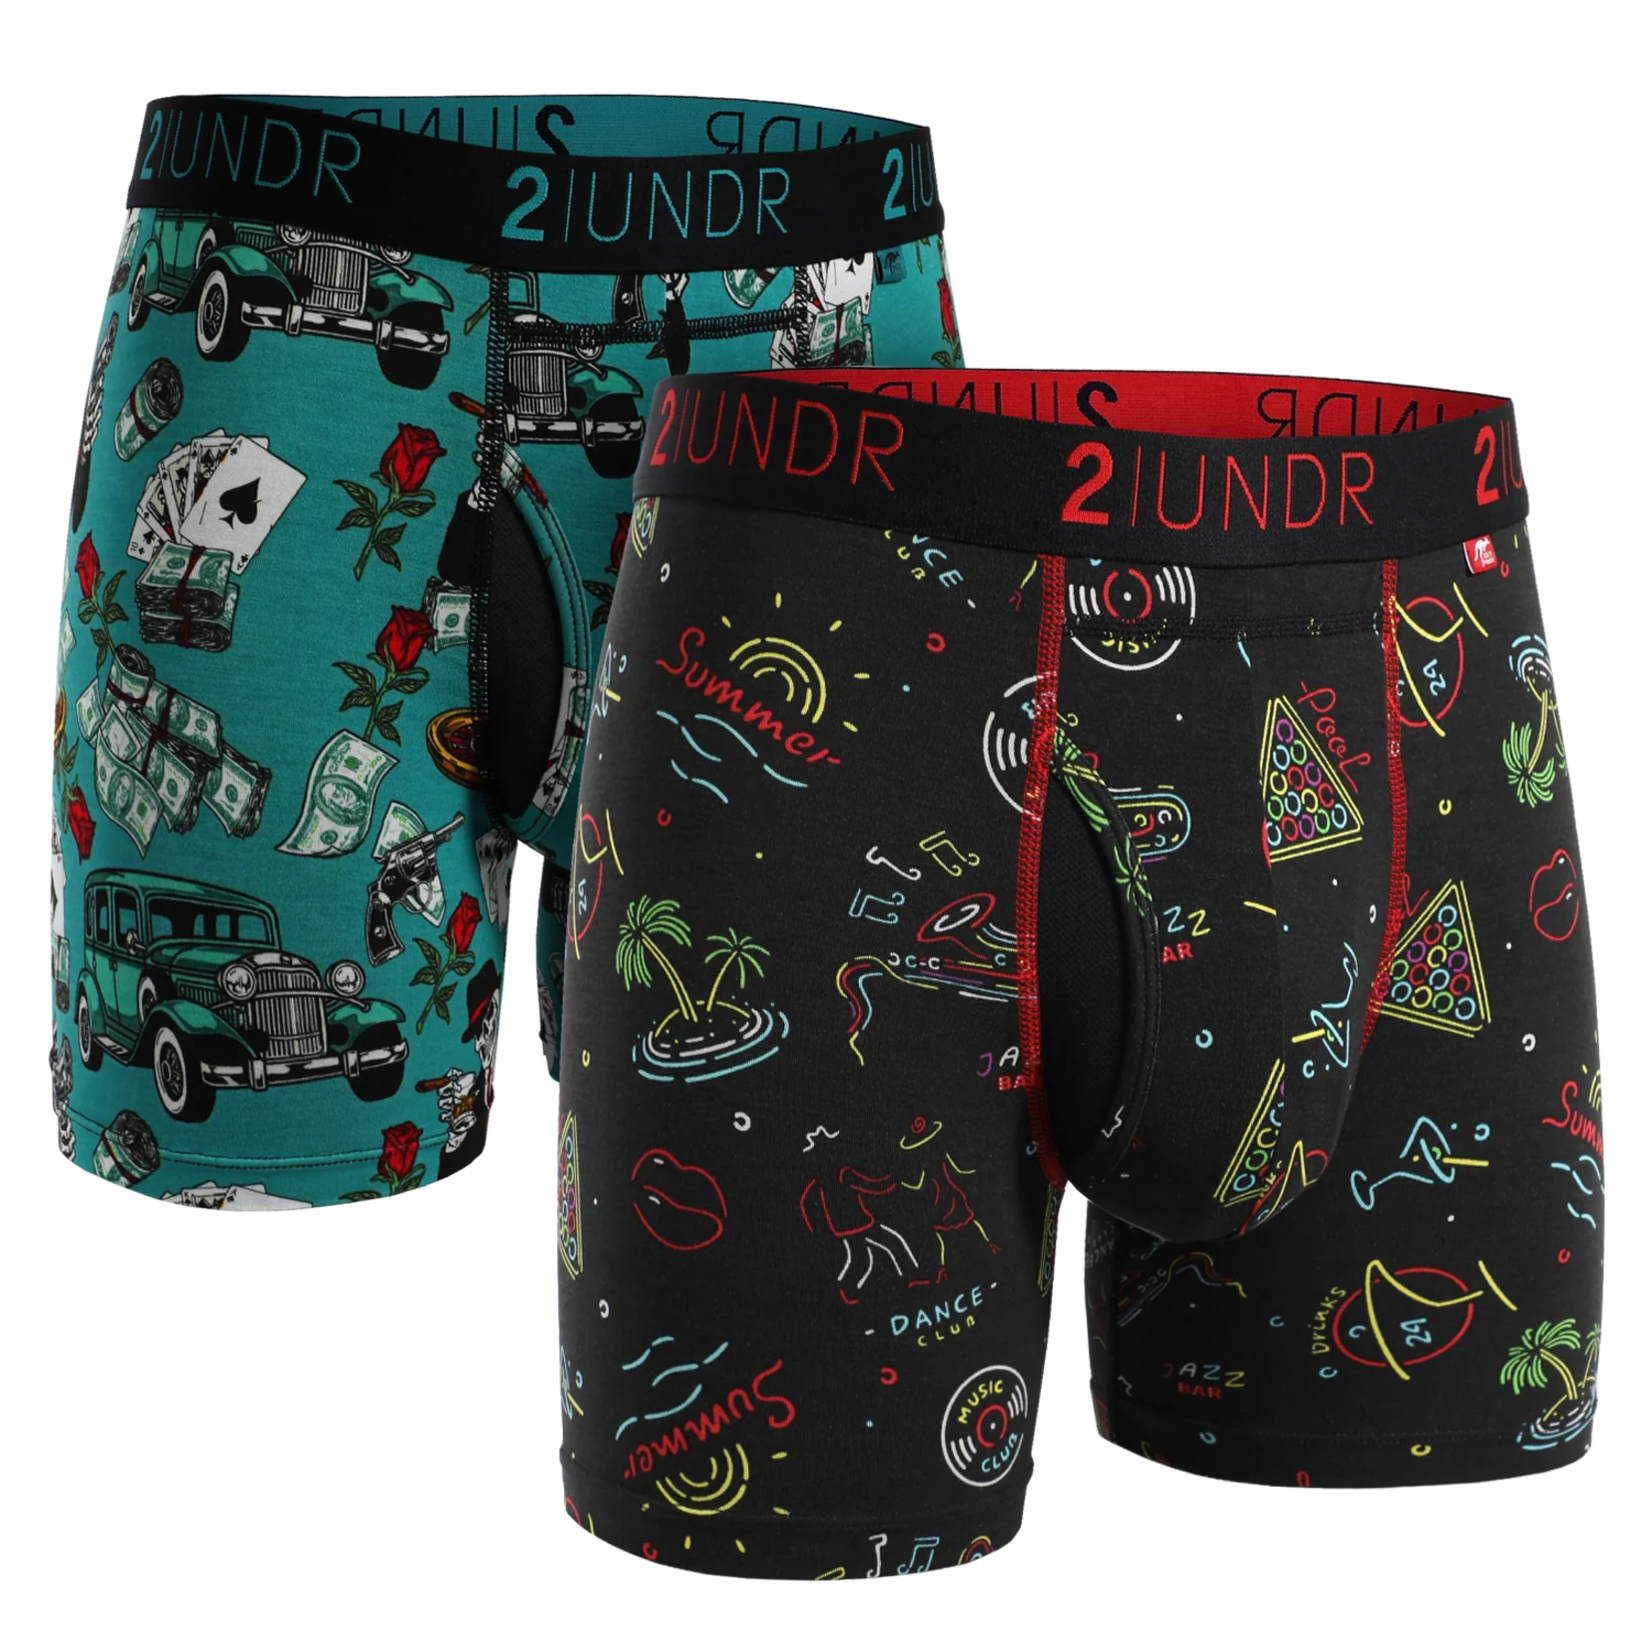 2UNDR SWING SHIFT BOXER BRIEF 2 PACK - MOBSTERS - VEGAS